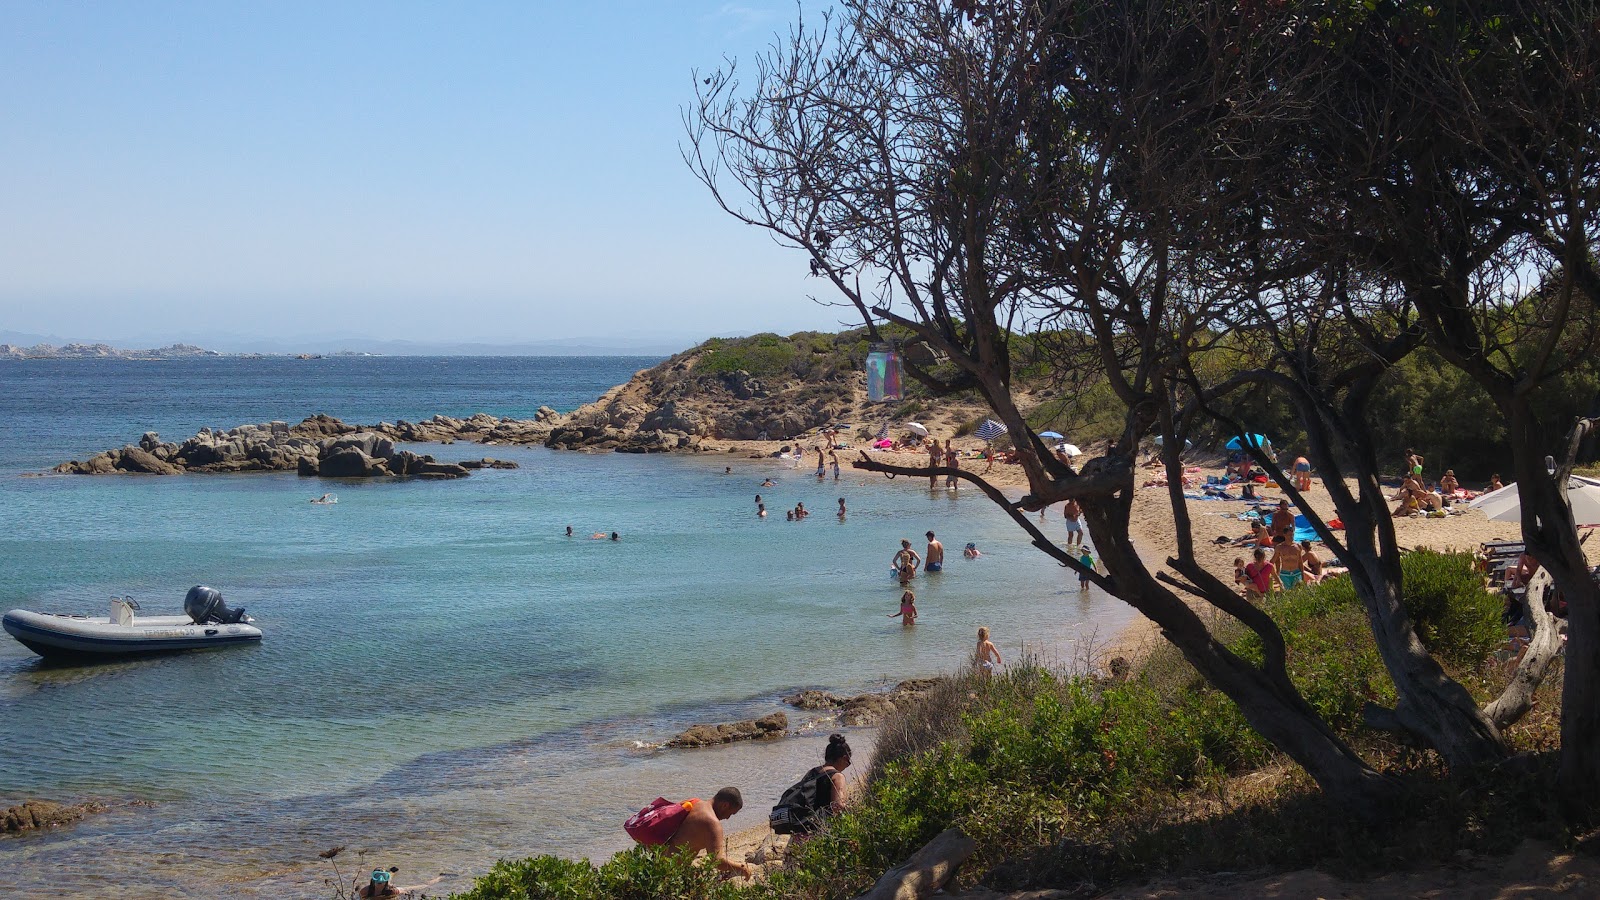 Photo of Plage de Cala longa located in natural area